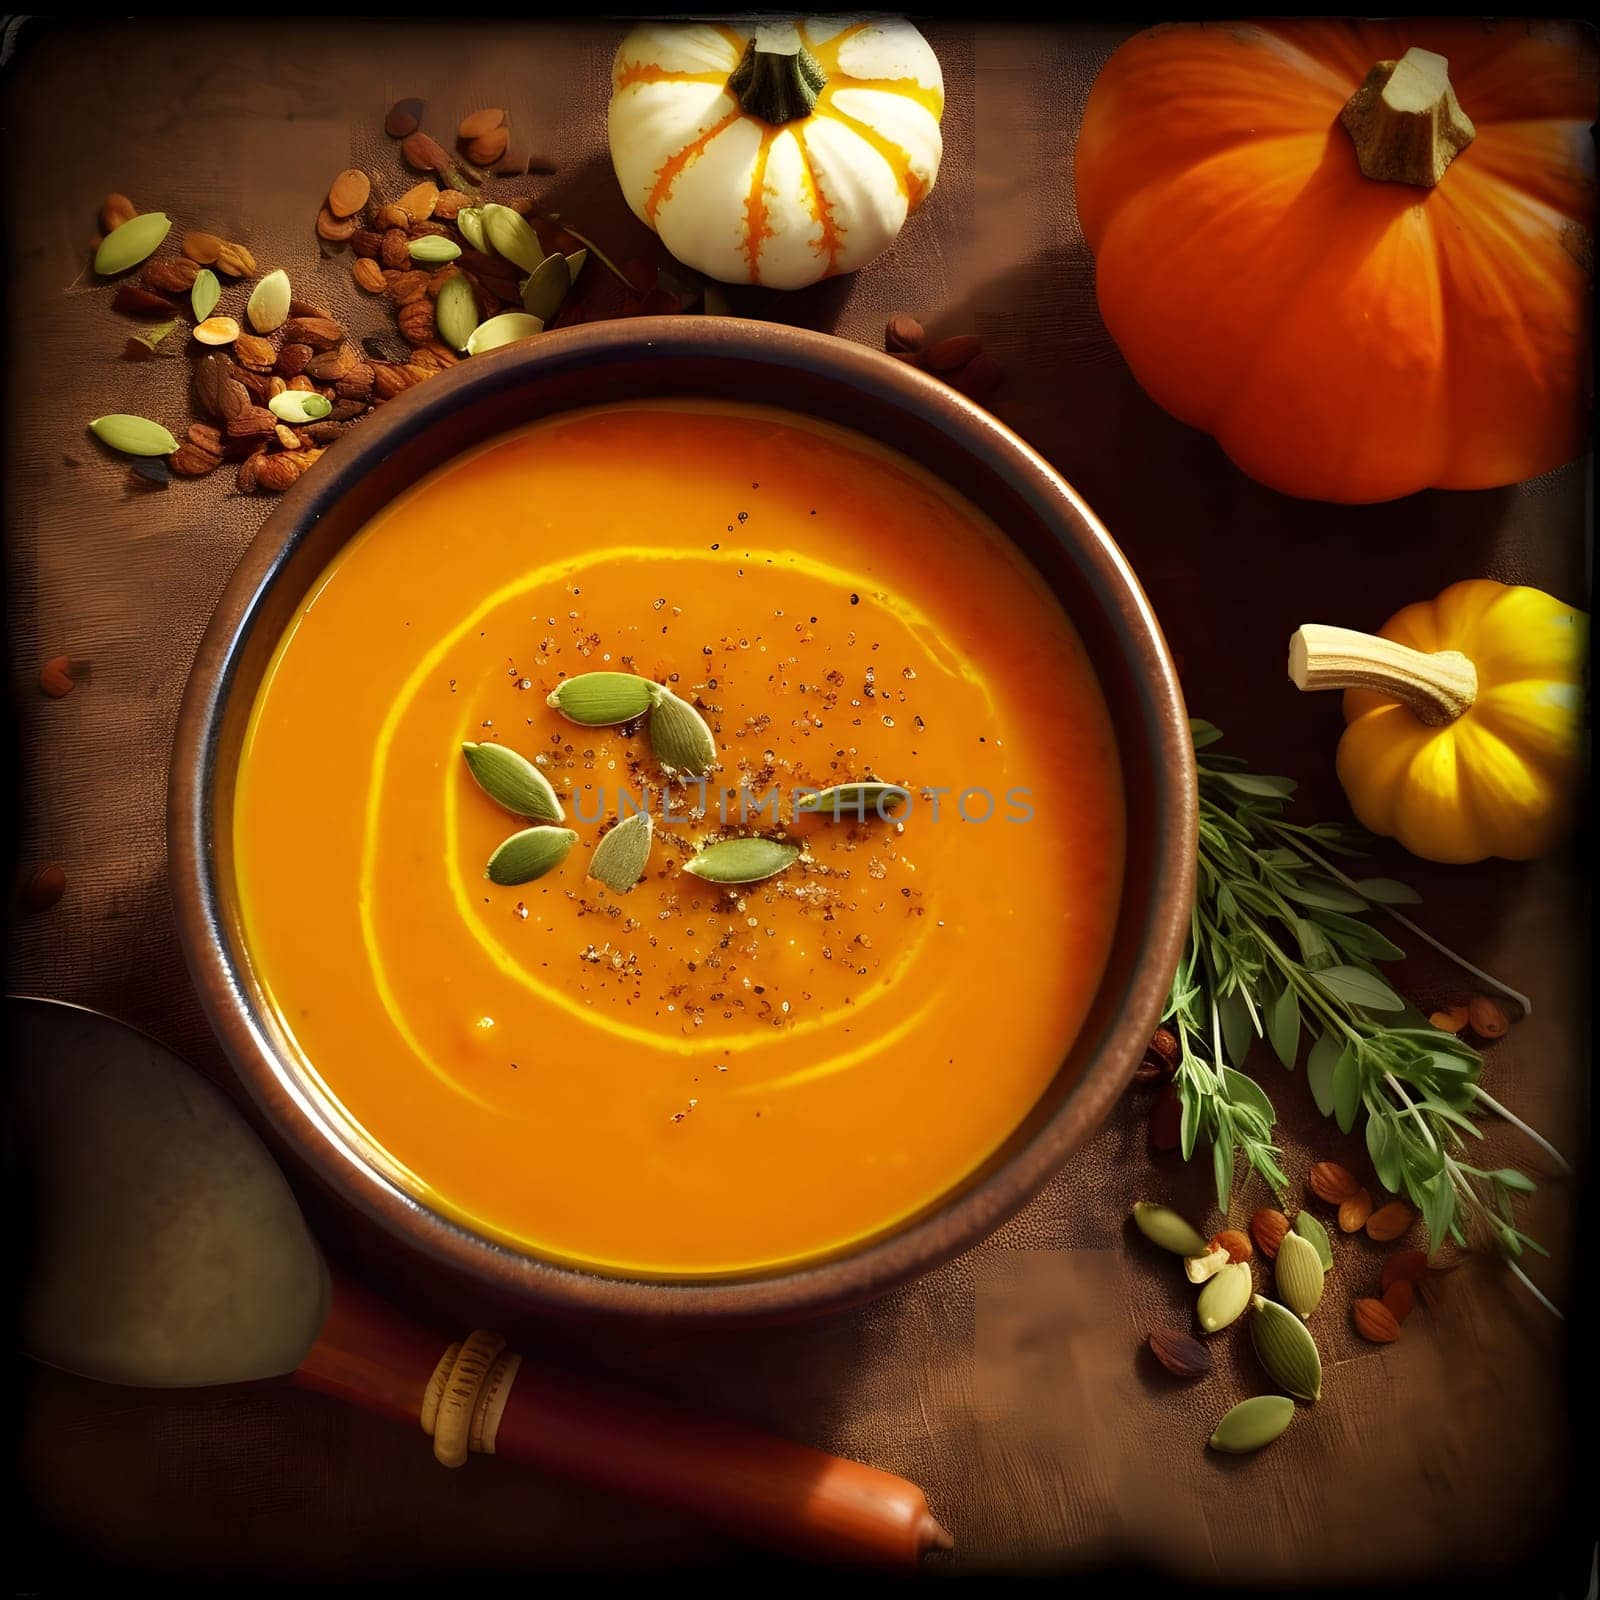 An aerial view of the day's soup and spiced seeds and pumpkins all around. Pumpkin as a dish of thanksgiving for the harvest. An atmosphere of joy and celebration.